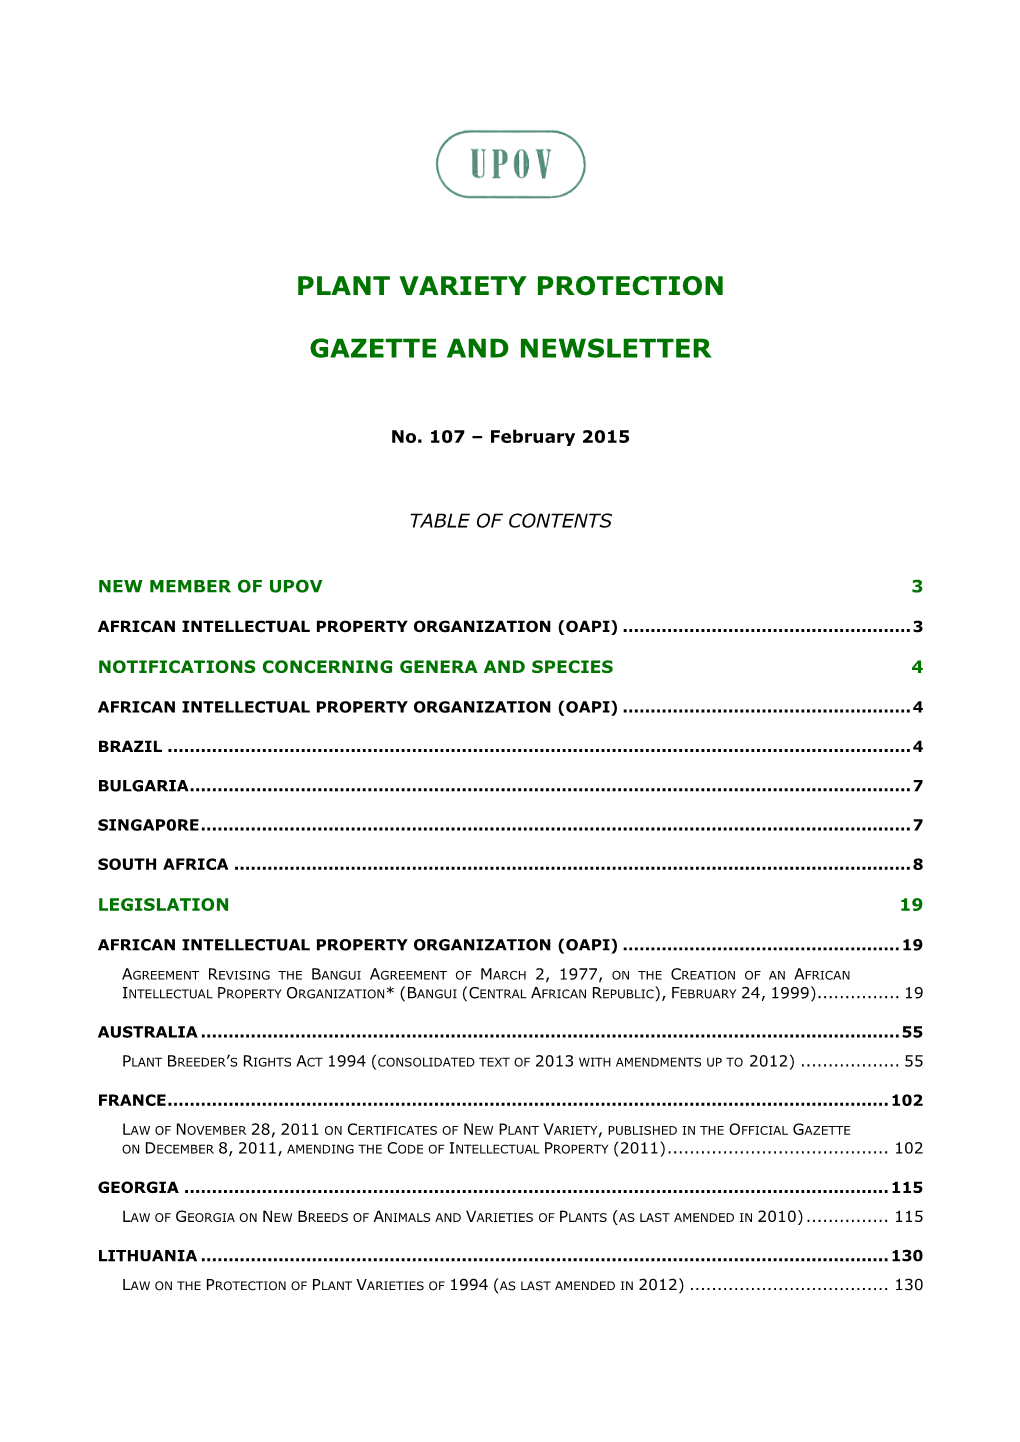 Plant Variety Protection Gazette and Newsletter